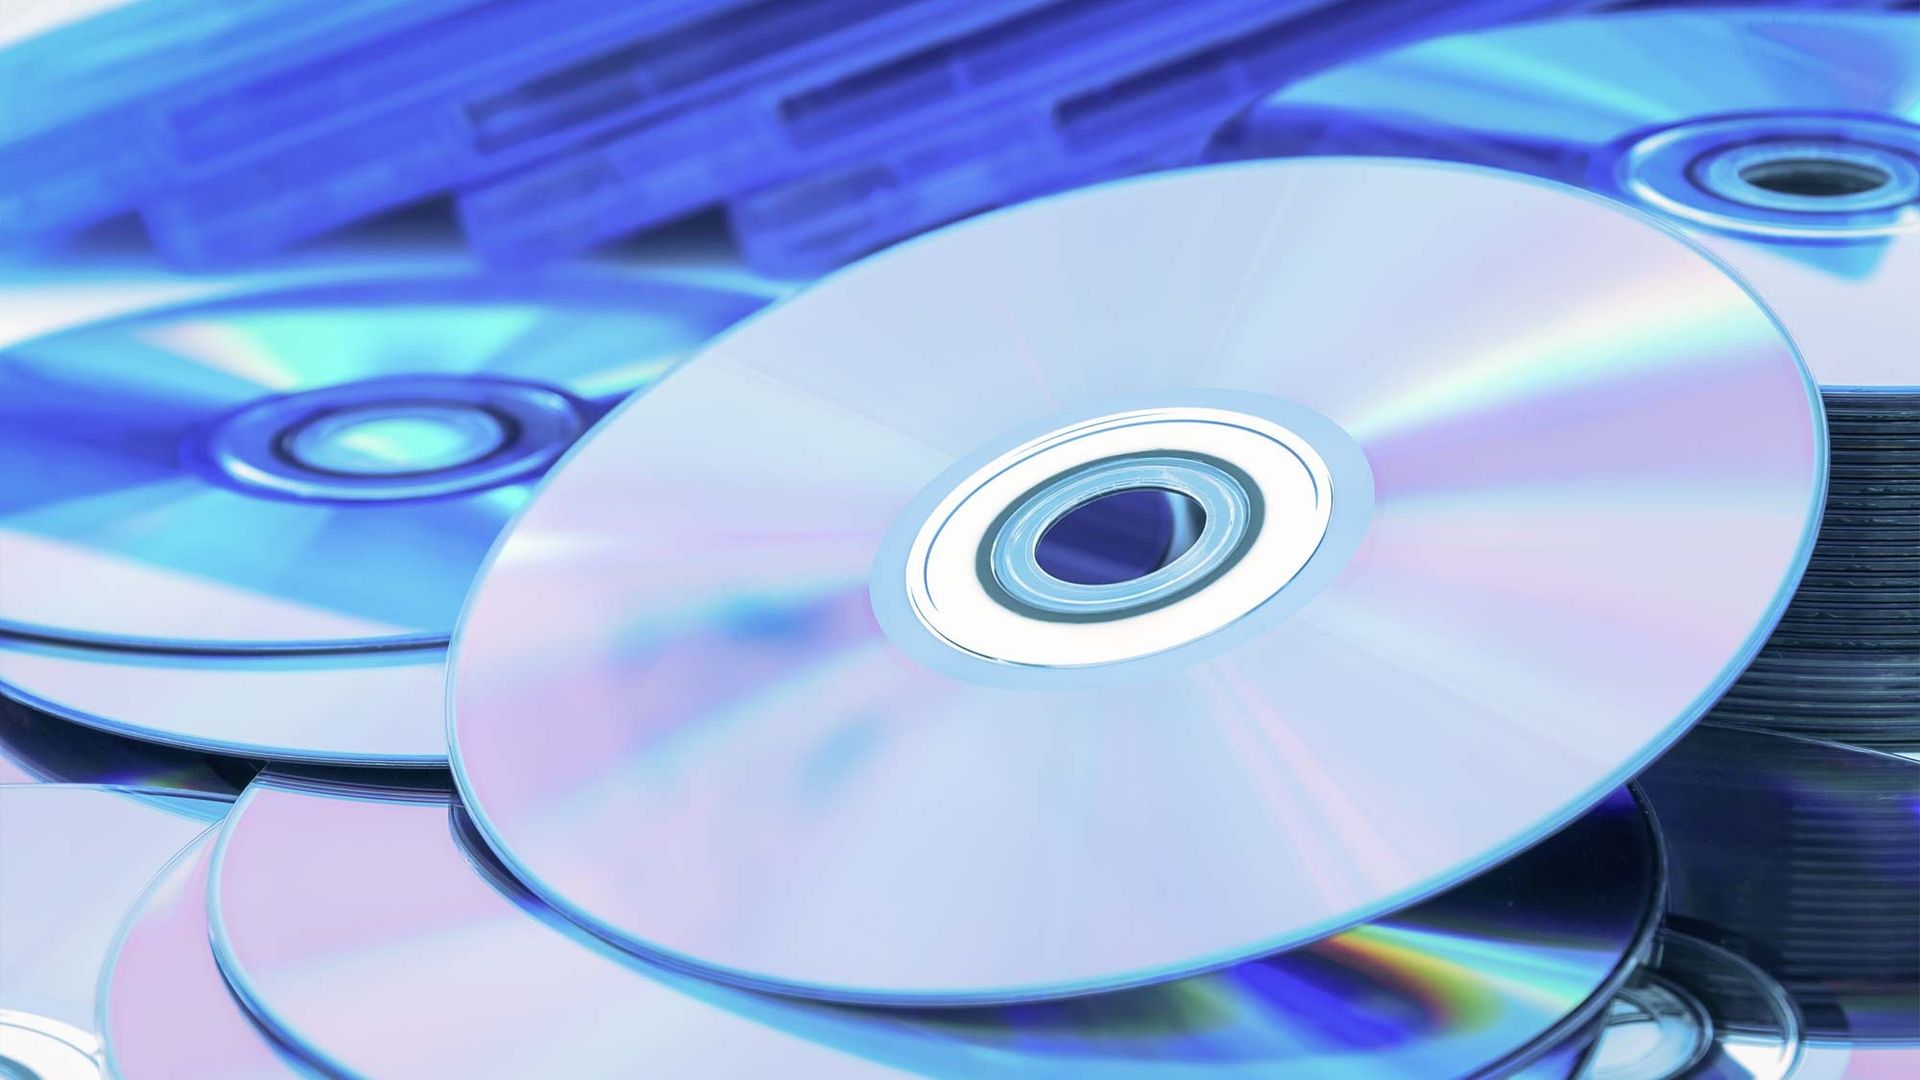 Commercial Blu-ray Discs Market